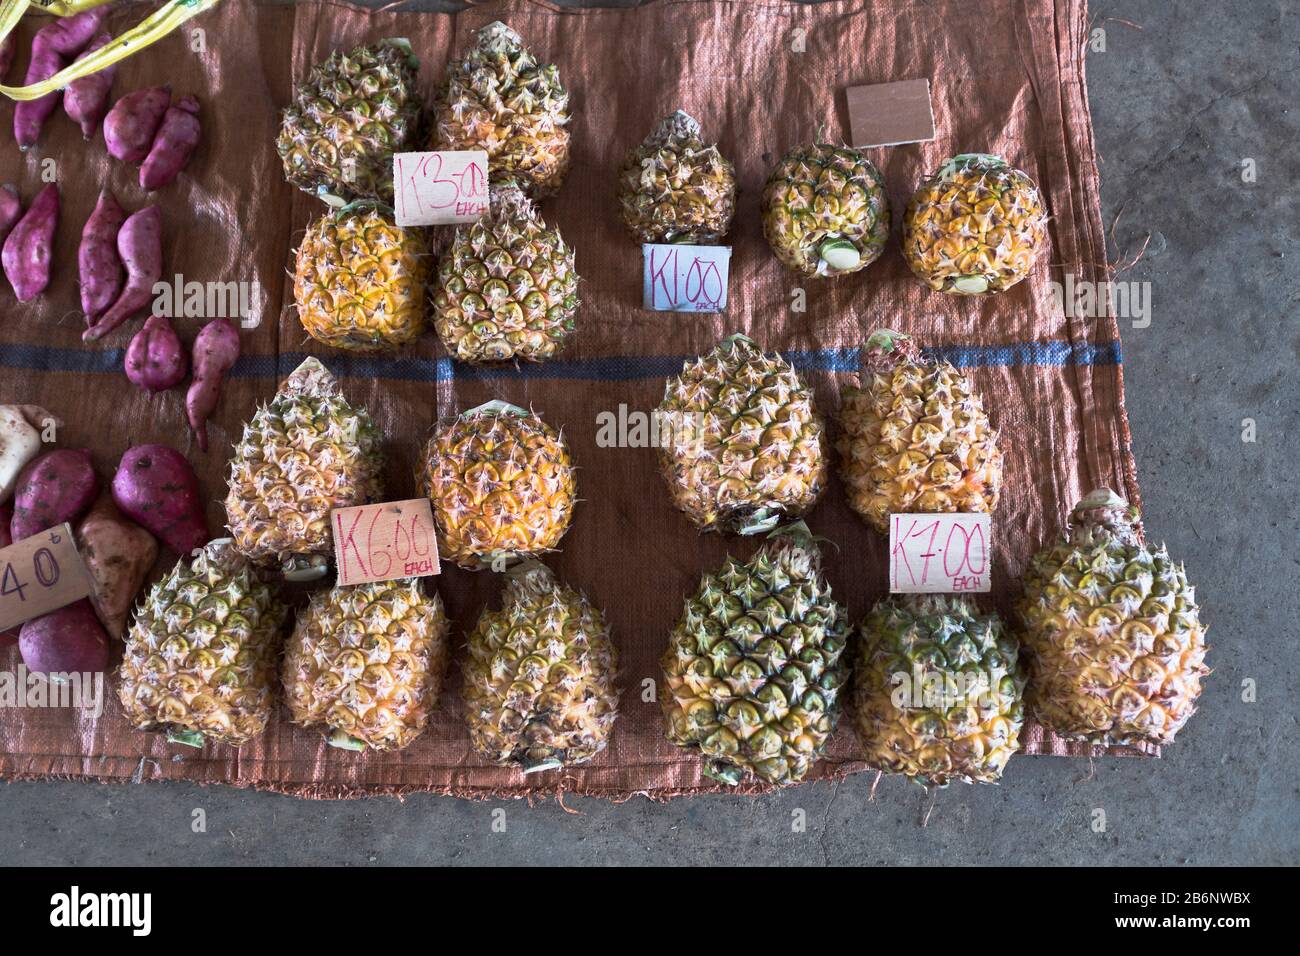 dh PNG Market ALOTAU PAPUA NEW GUINEA Pineapples markets product display fresh pineapple stall Stock Photo